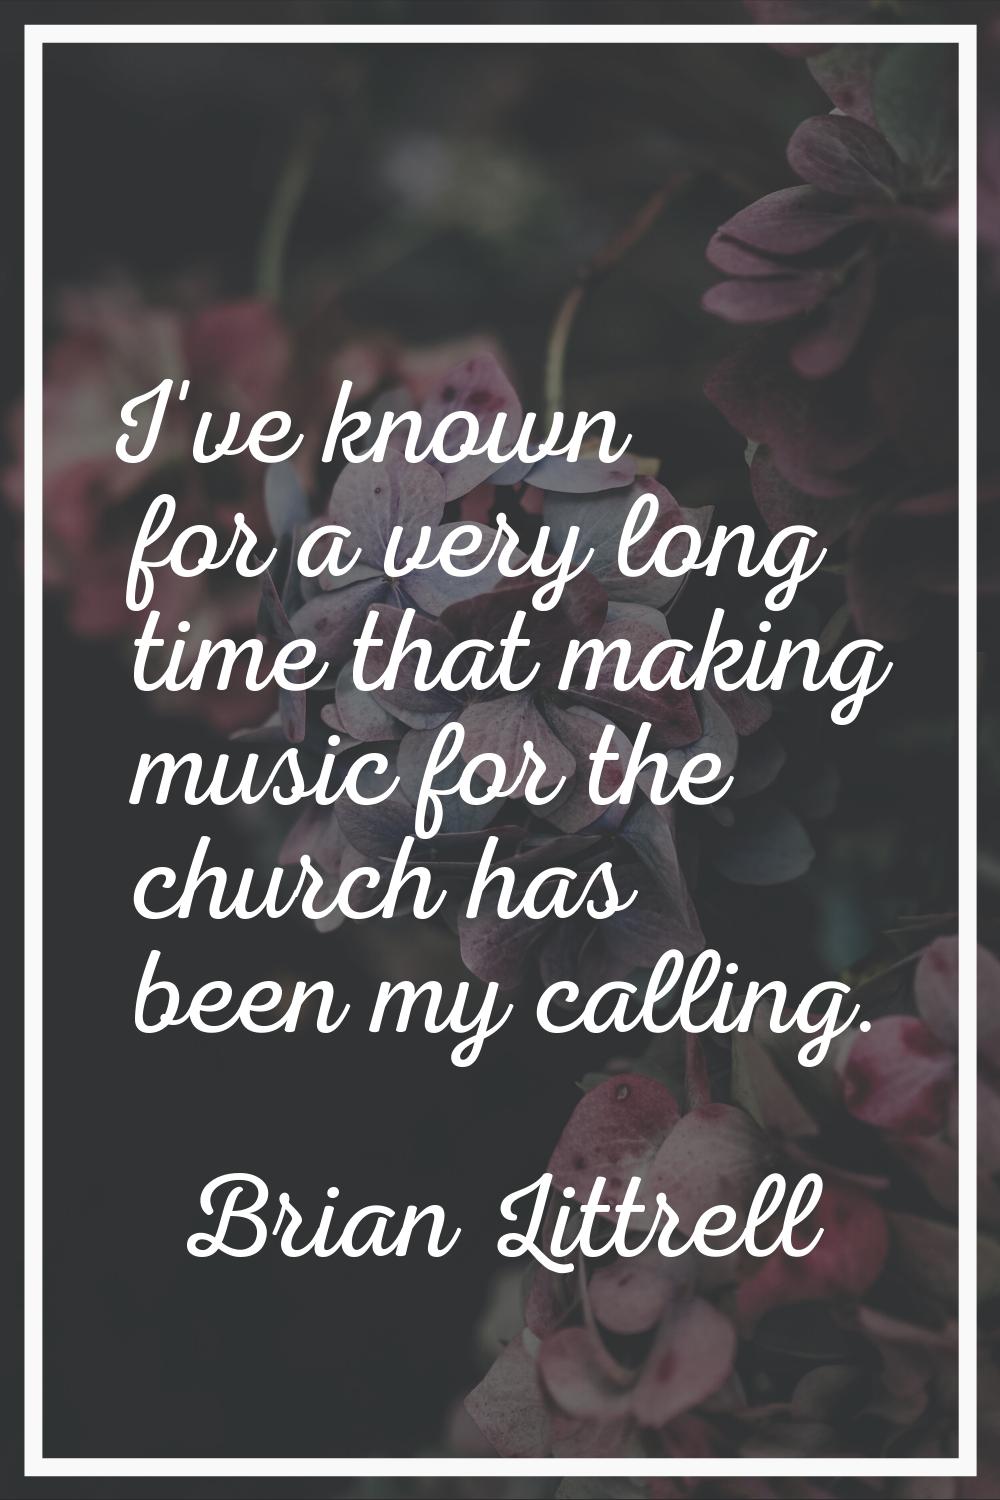 I've known for a very long time that making music for the church has been my calling.